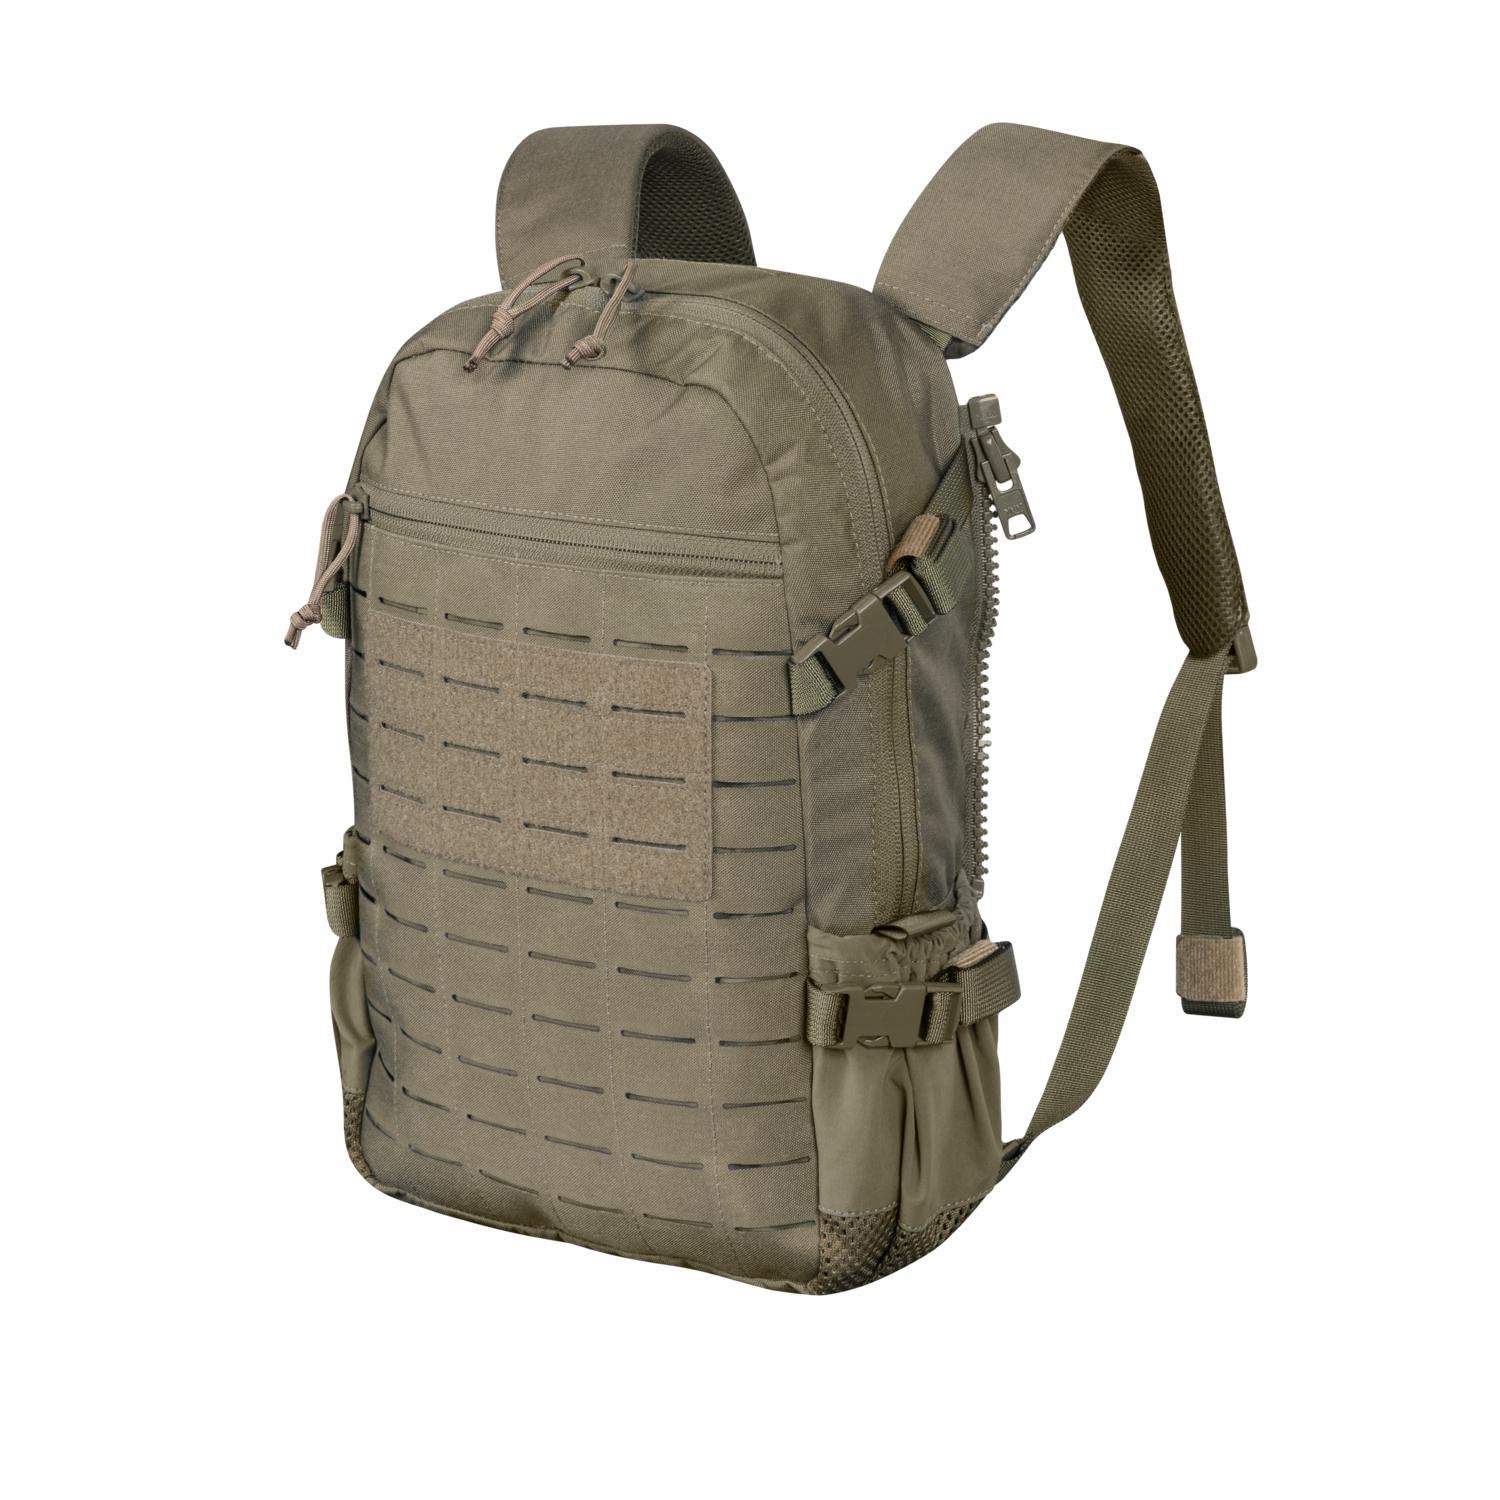 Direct Action Spitfire MK II Backpack panel adaptive green